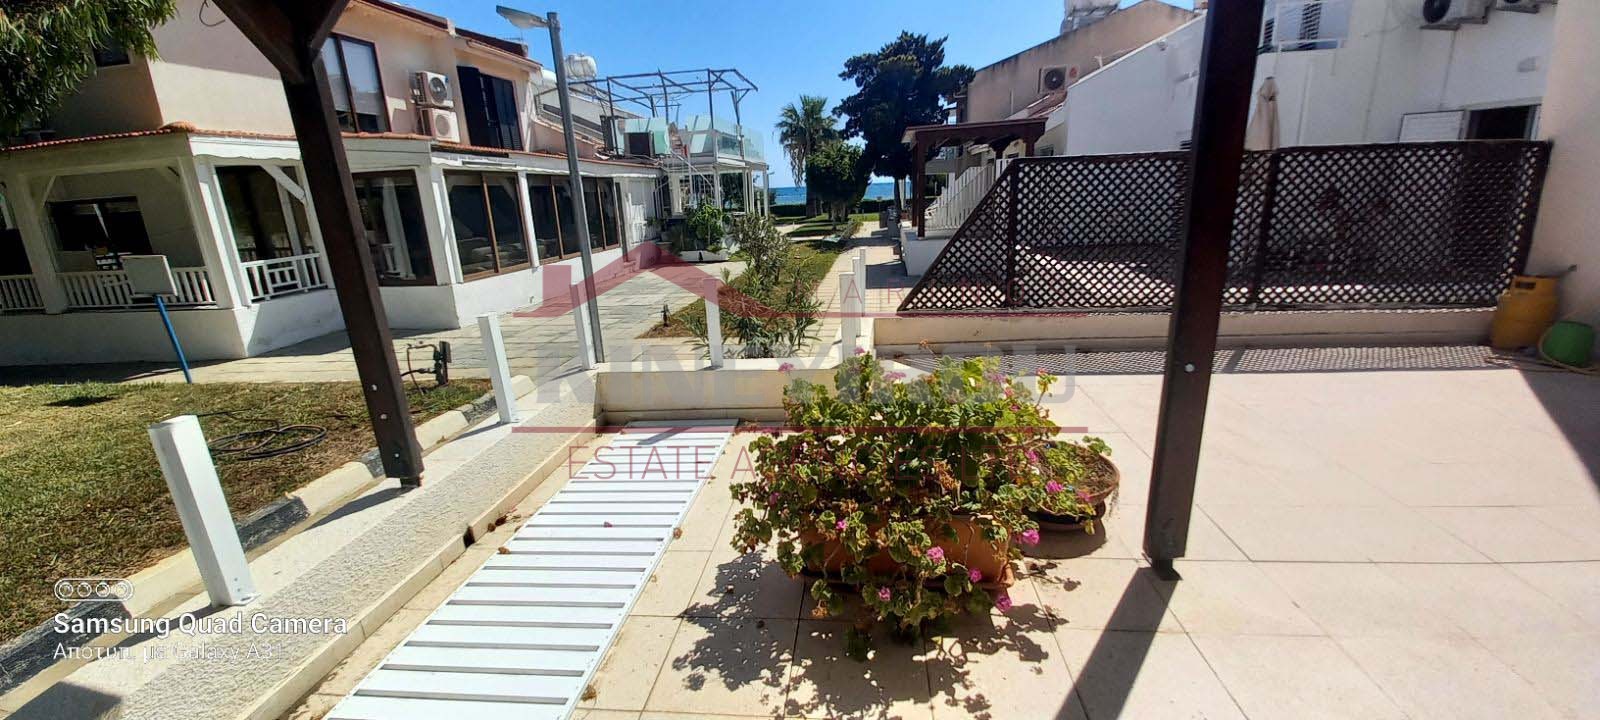 Three bedroom detached house situated in the Dhekelia area, in Larnaca.